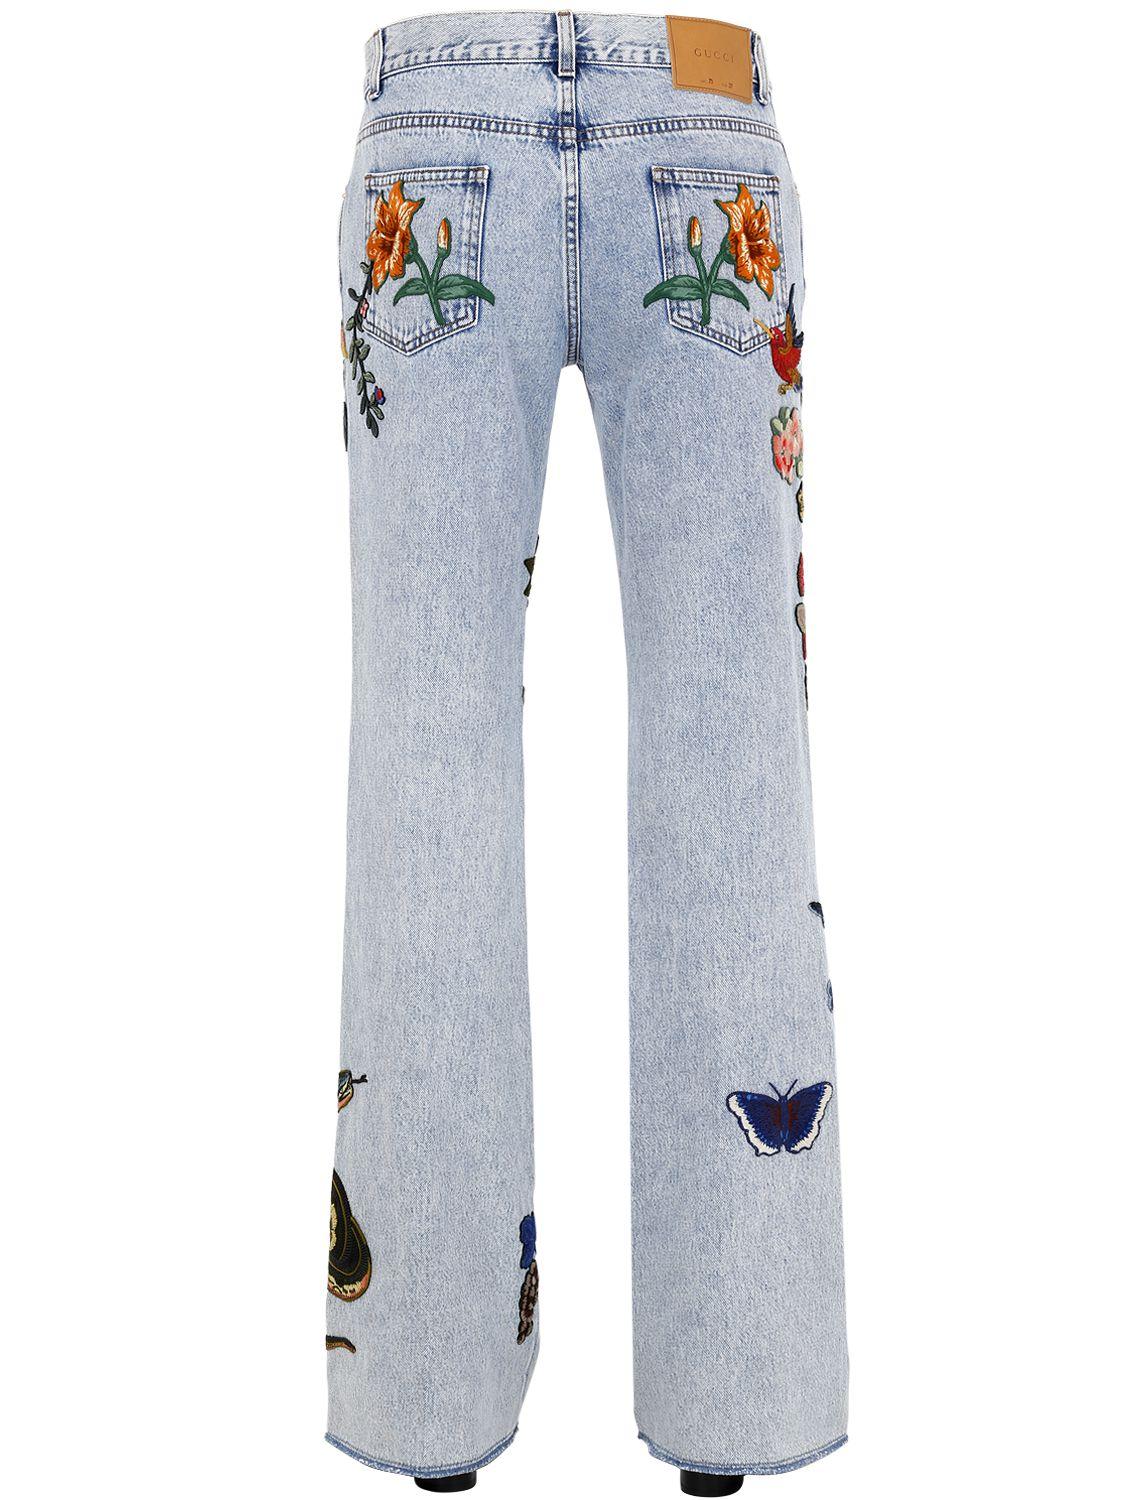 Lyst - Gucci Flared Embroidered Patches Denim Jeans in Blue